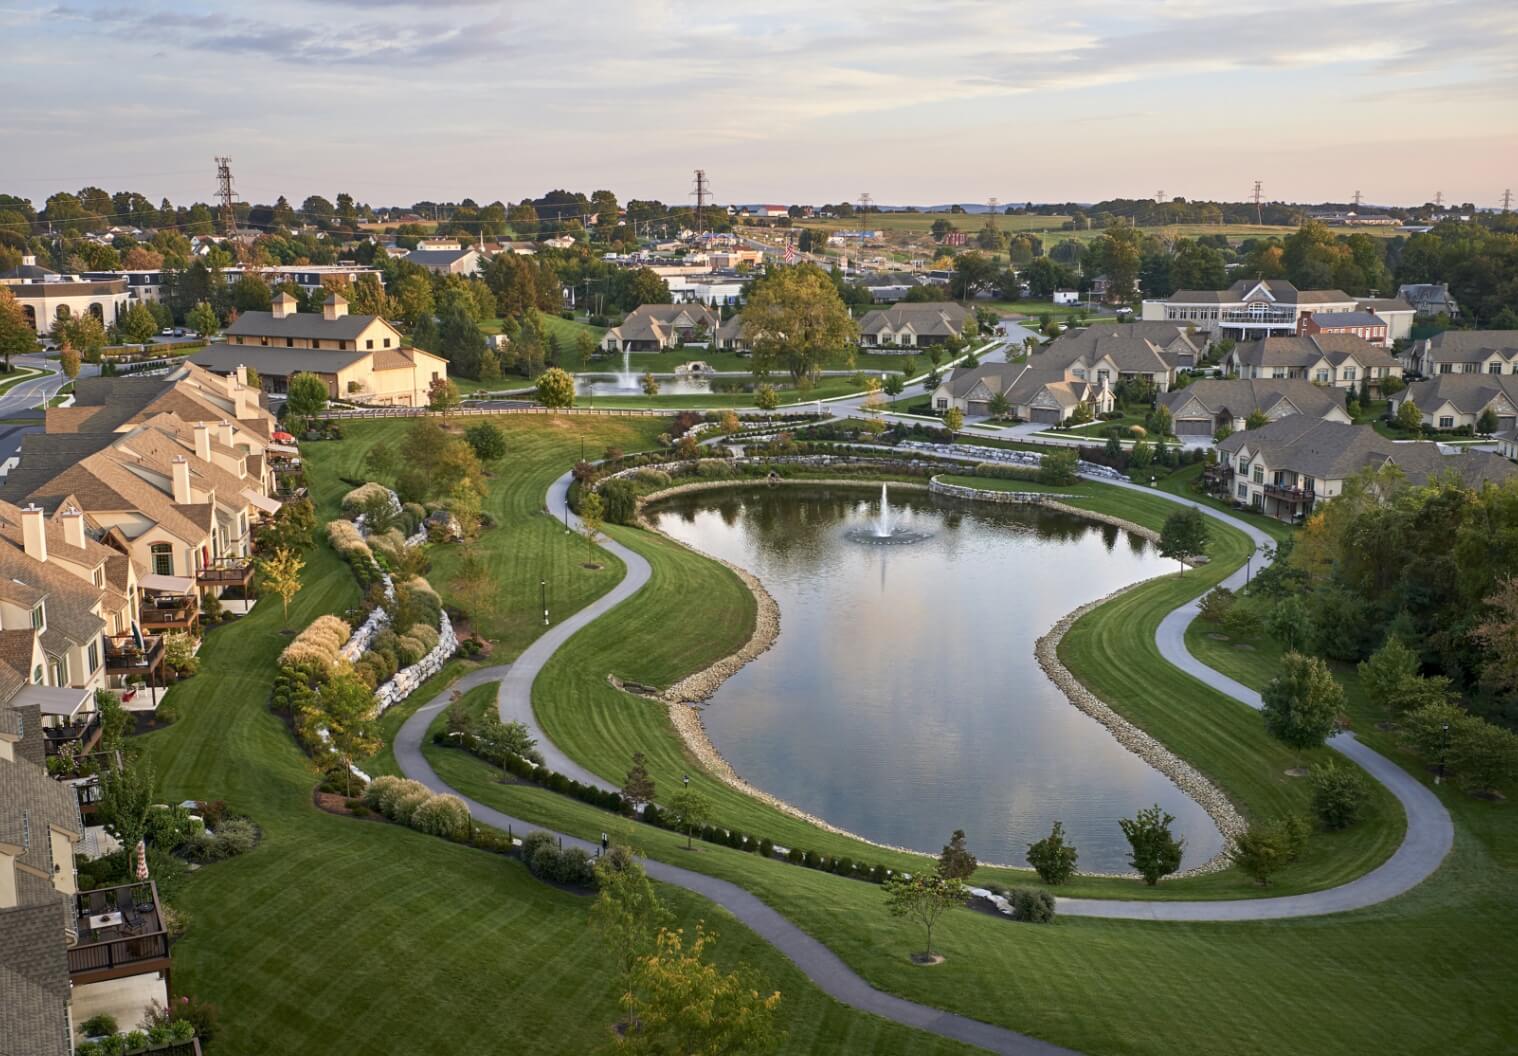 An aerial view of a retirement community with a pond.